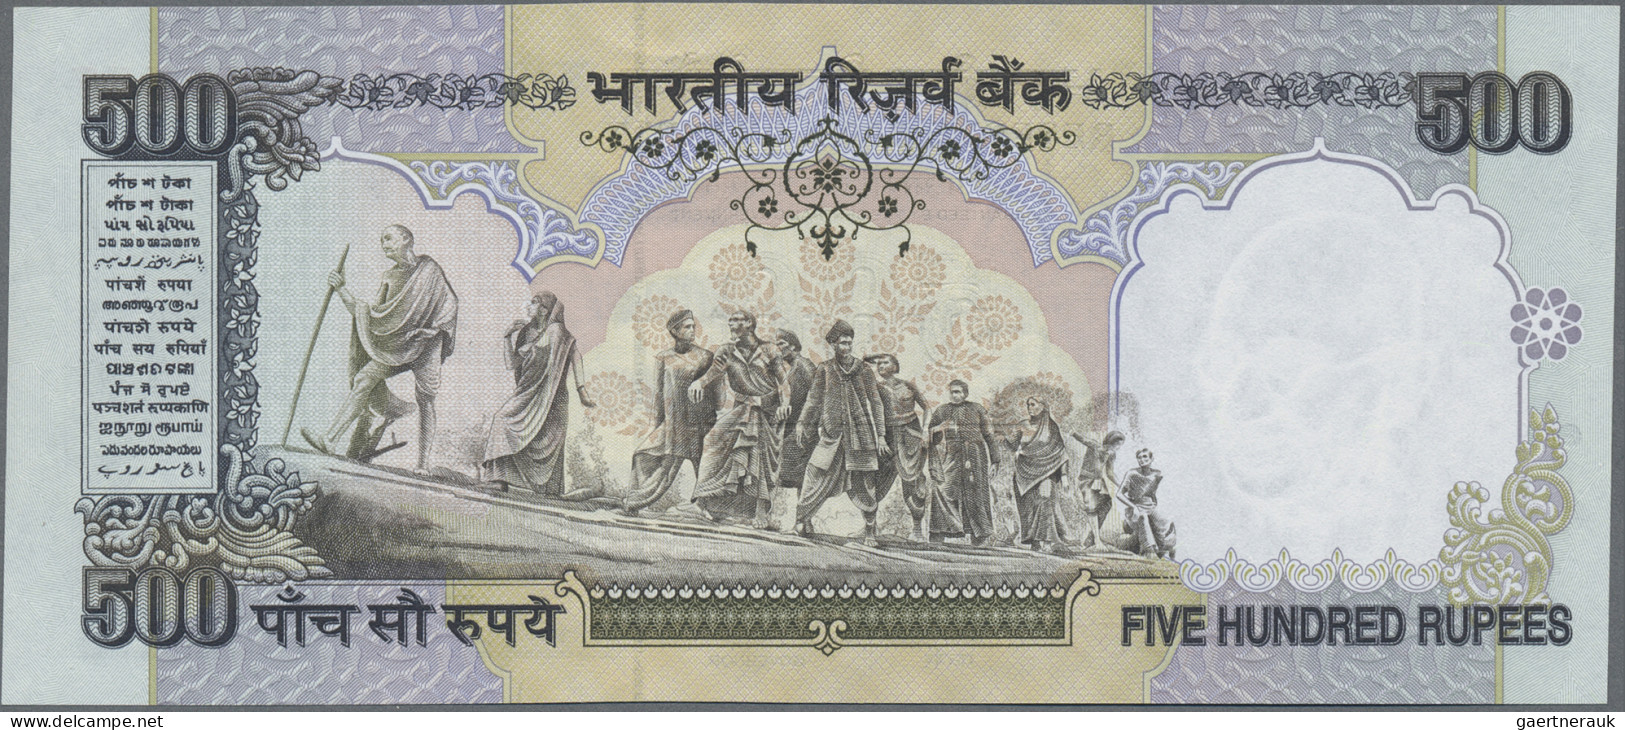 India: Government and Reserve Bank of India, giant lot with 45 banknotes 1-1.000